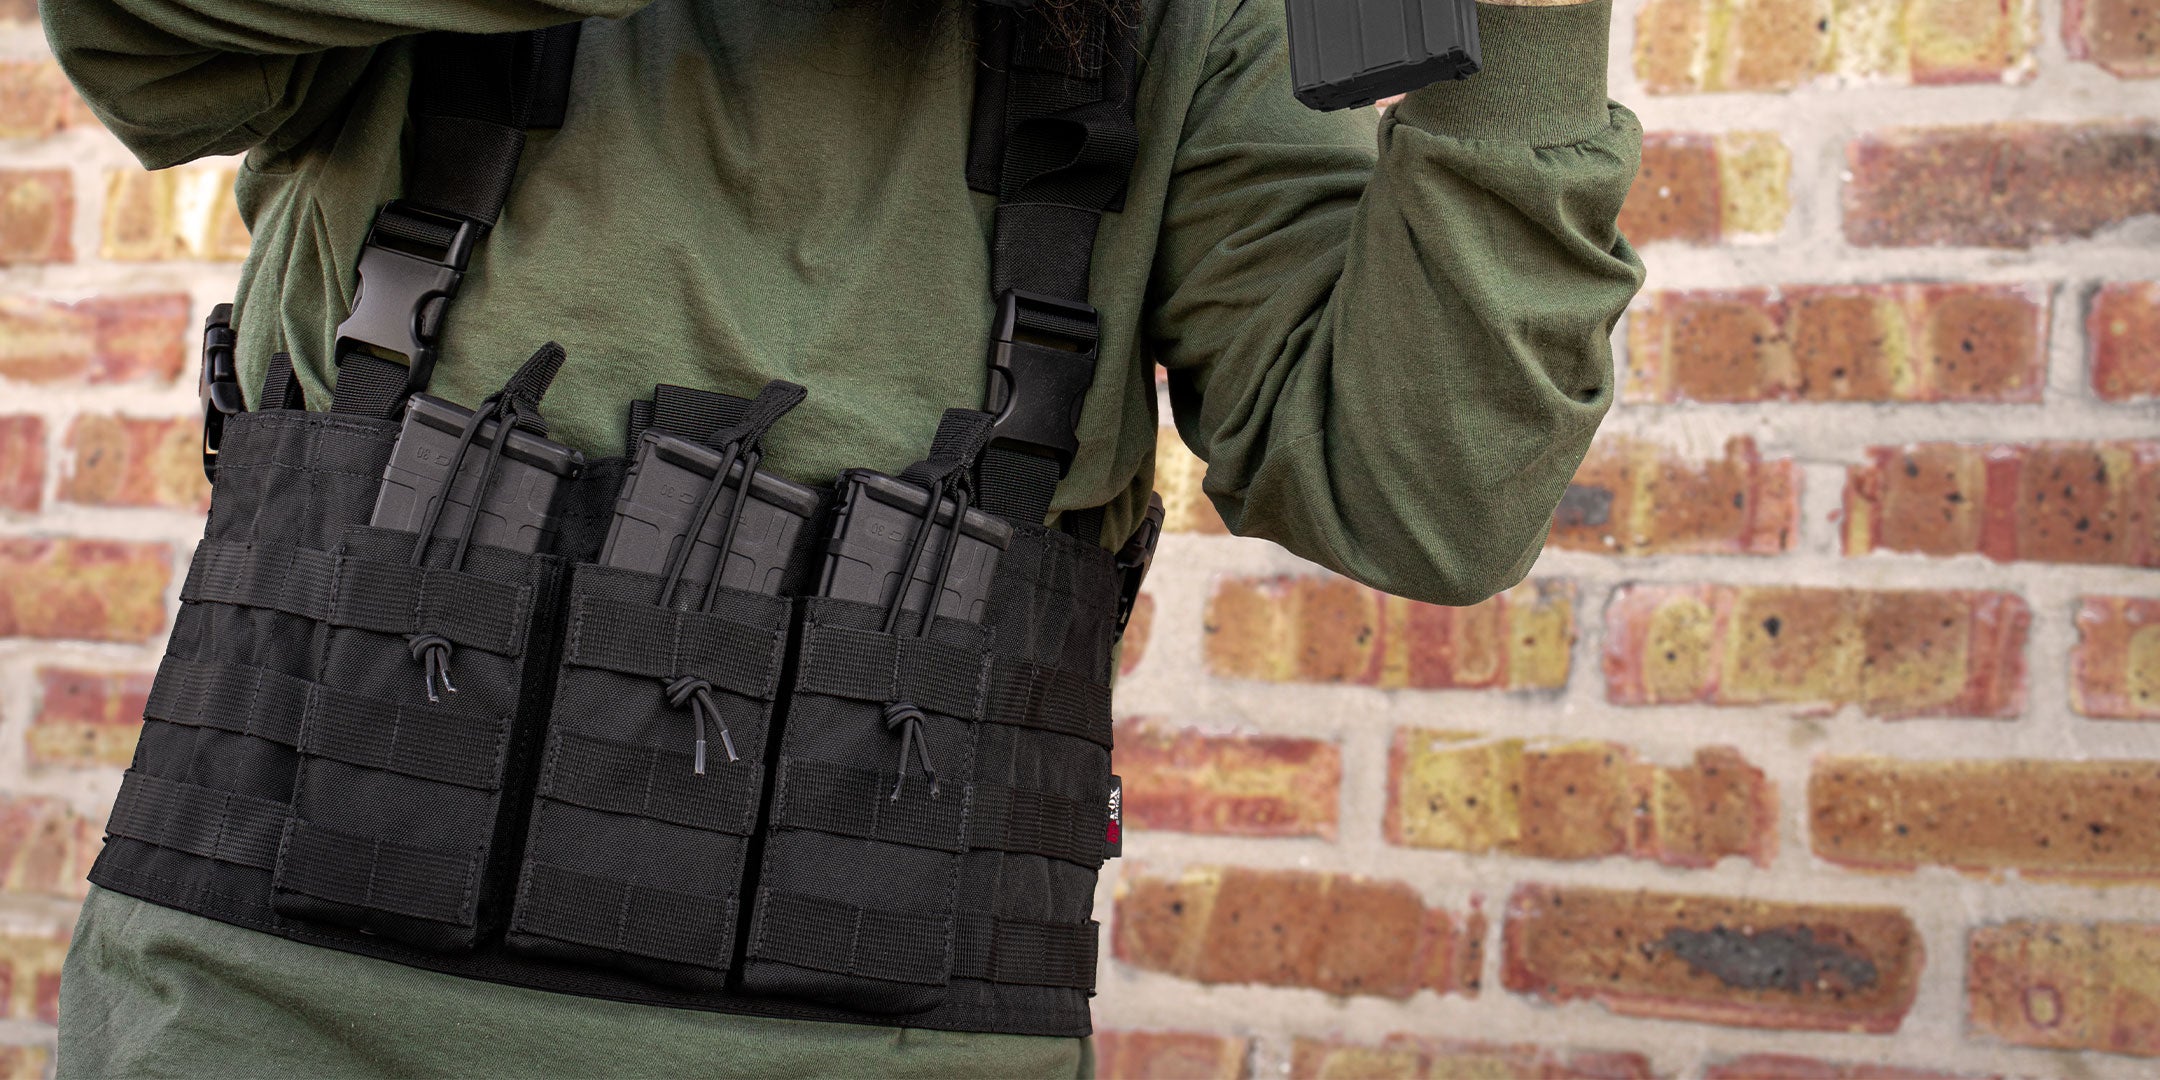 Closeup of the Tactical Chest rig on person holding weapon